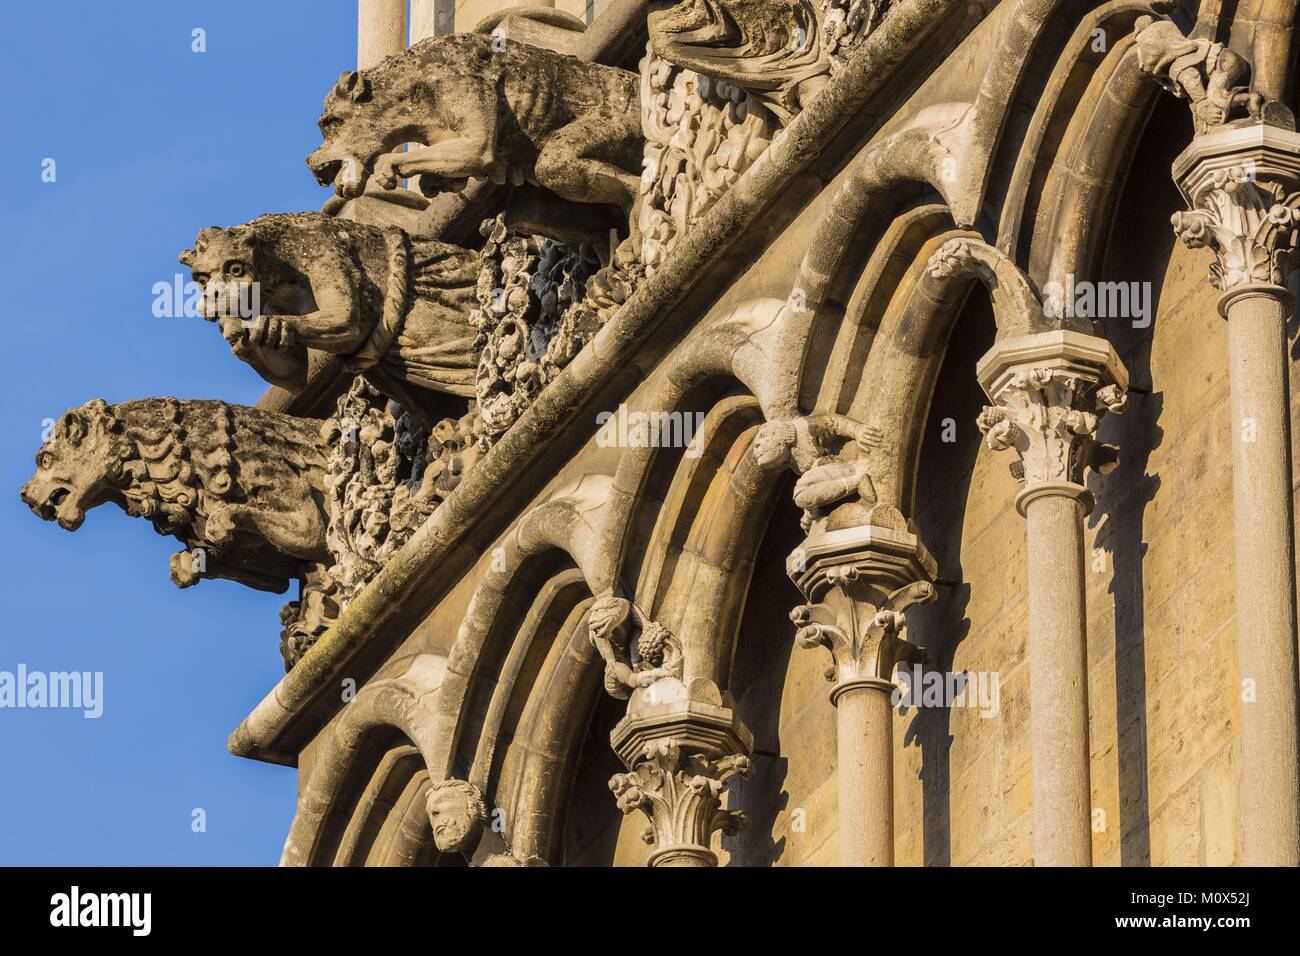 France,Cote d'Or,Cultural landscape of Burgundy climates listed as World Heritage by UNESCO,Dijon,Notre Dame Church,gargoyles Stock Photo